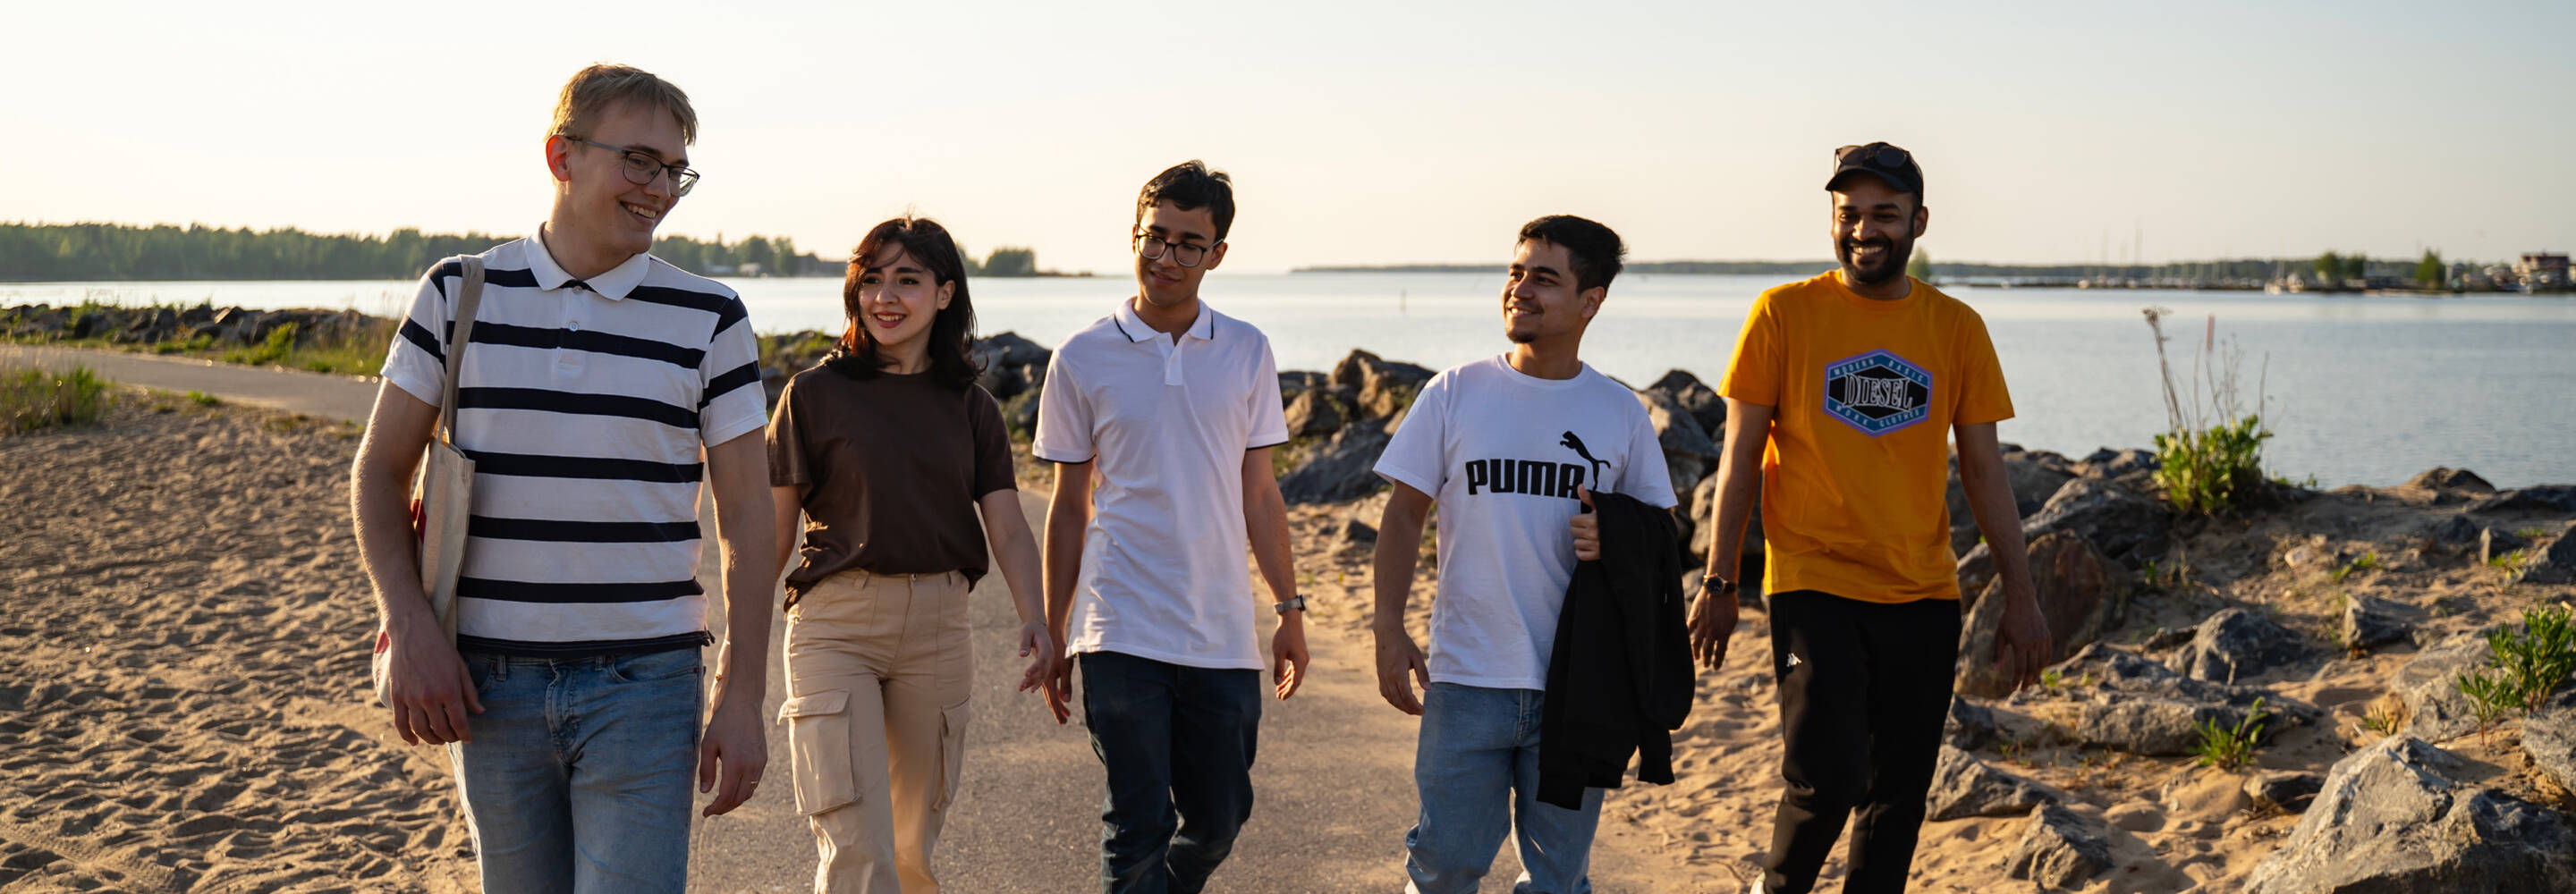 Group of students pictured walking in Kokkola seapark during summer